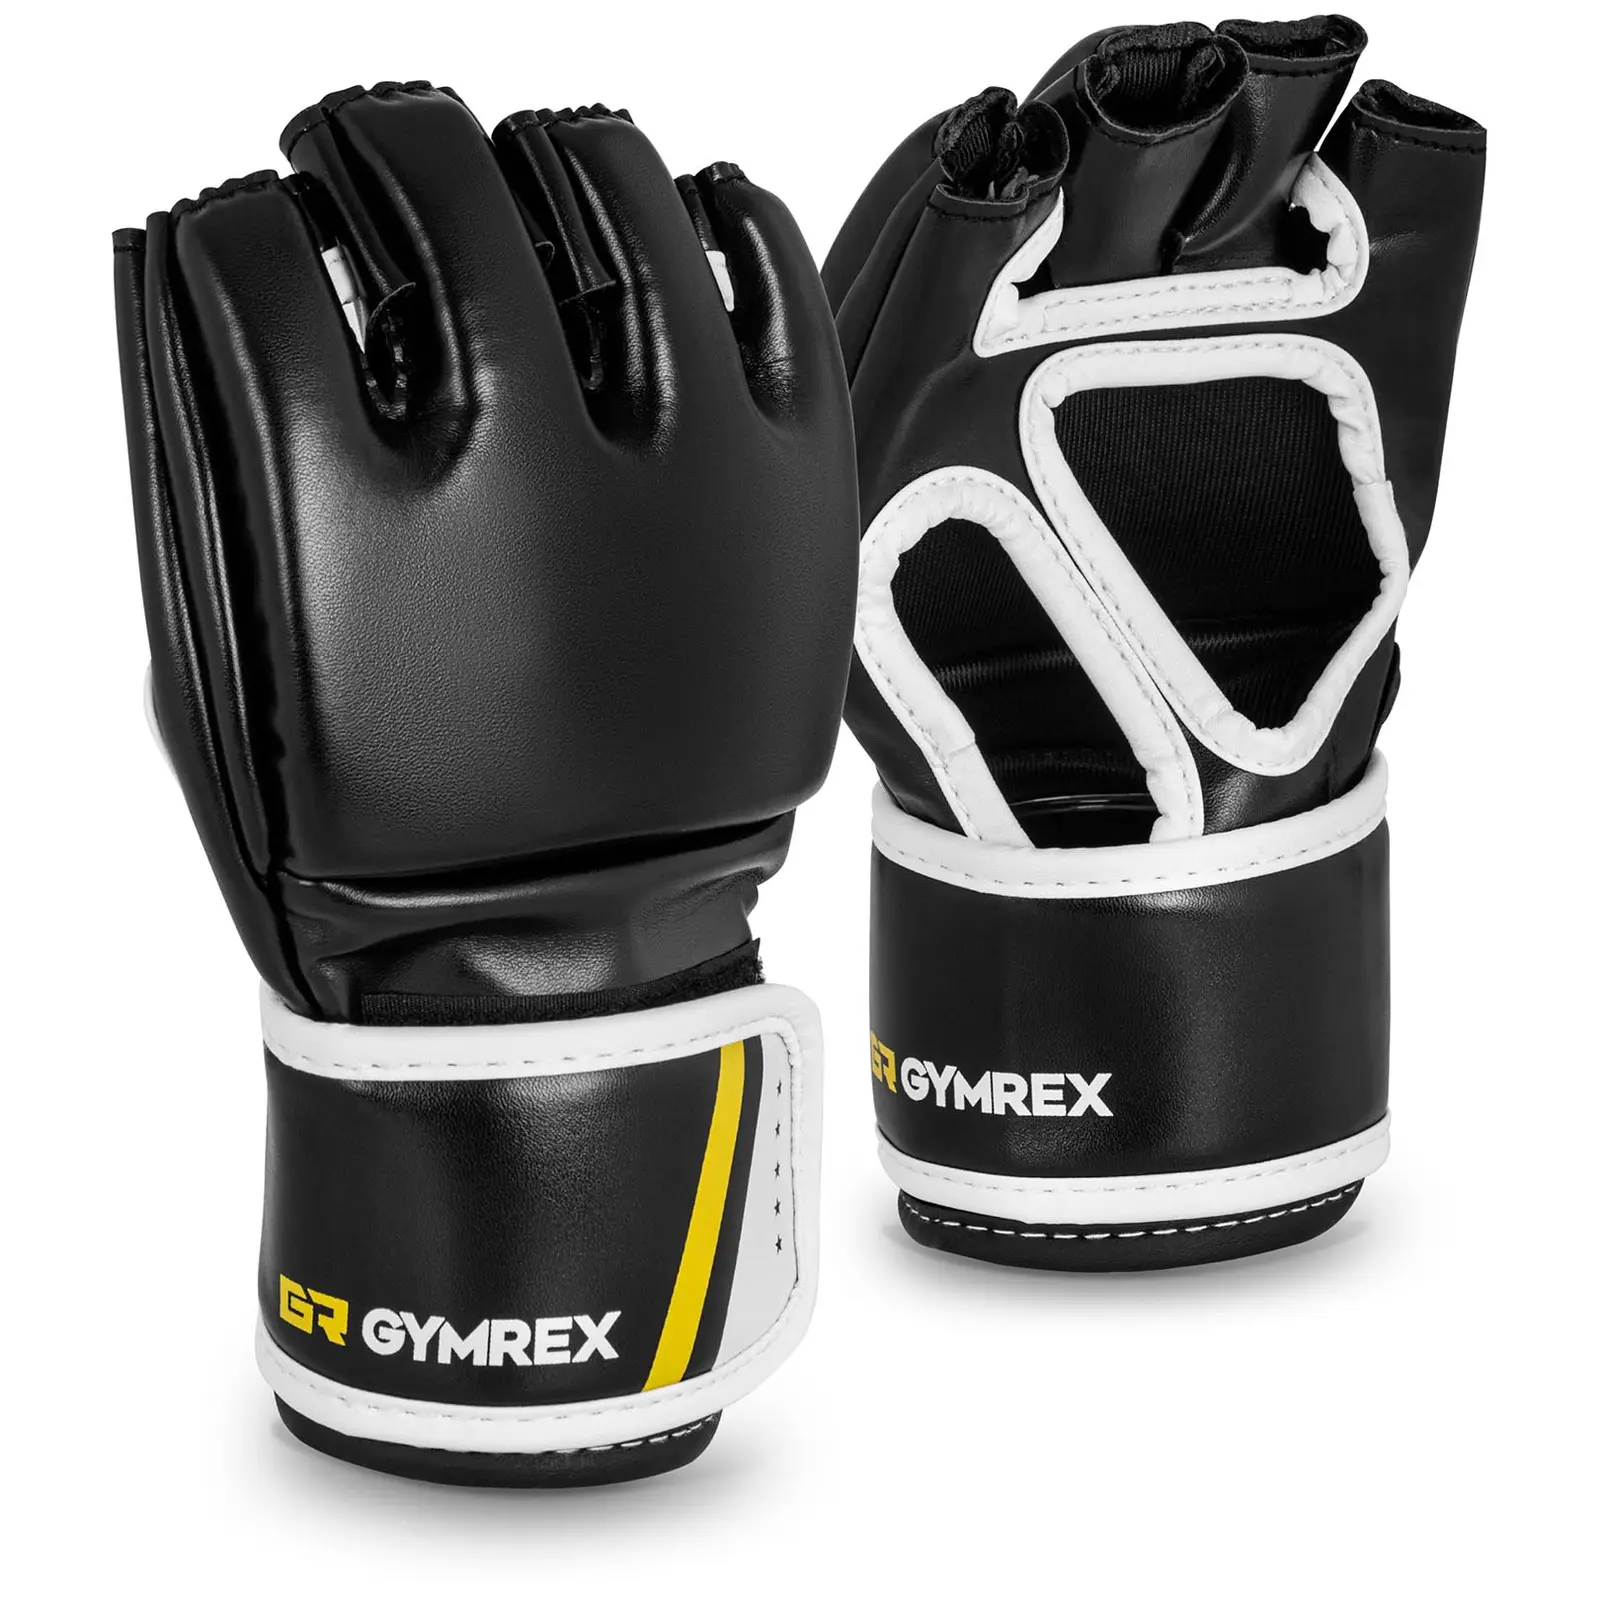 MMA Gloves - size S/M - black - without thumbs